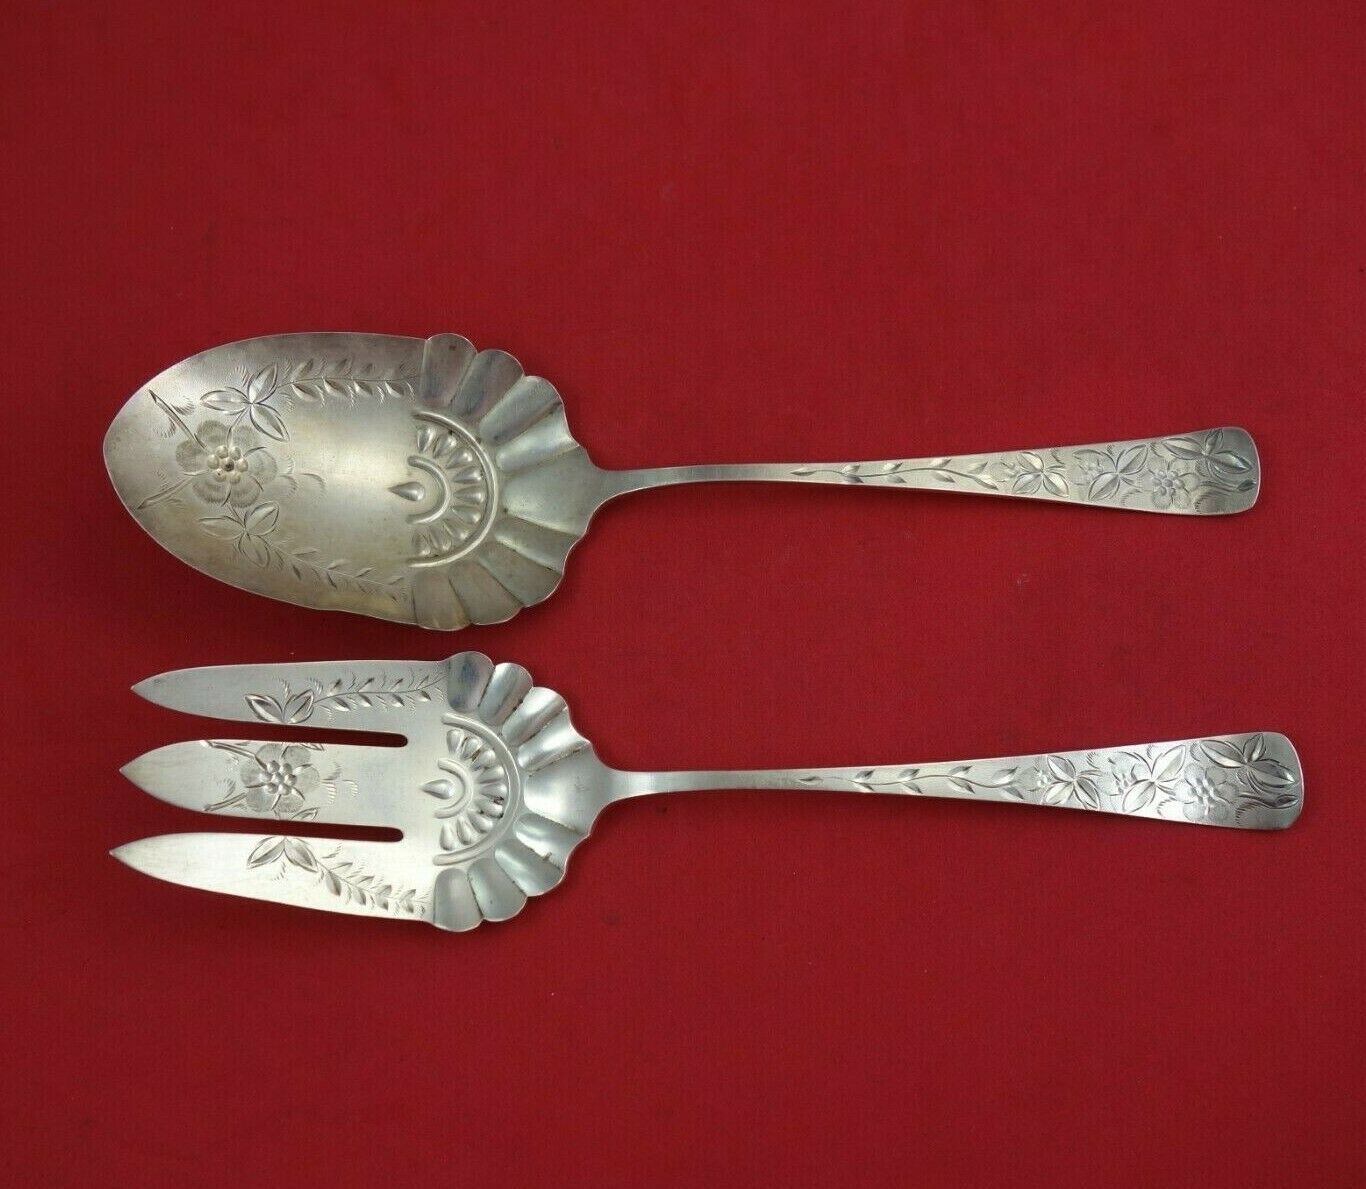 Primary image for Towle Sterling Silver Salad Serving Set 2-Piece #63 9 1/4" Silverware